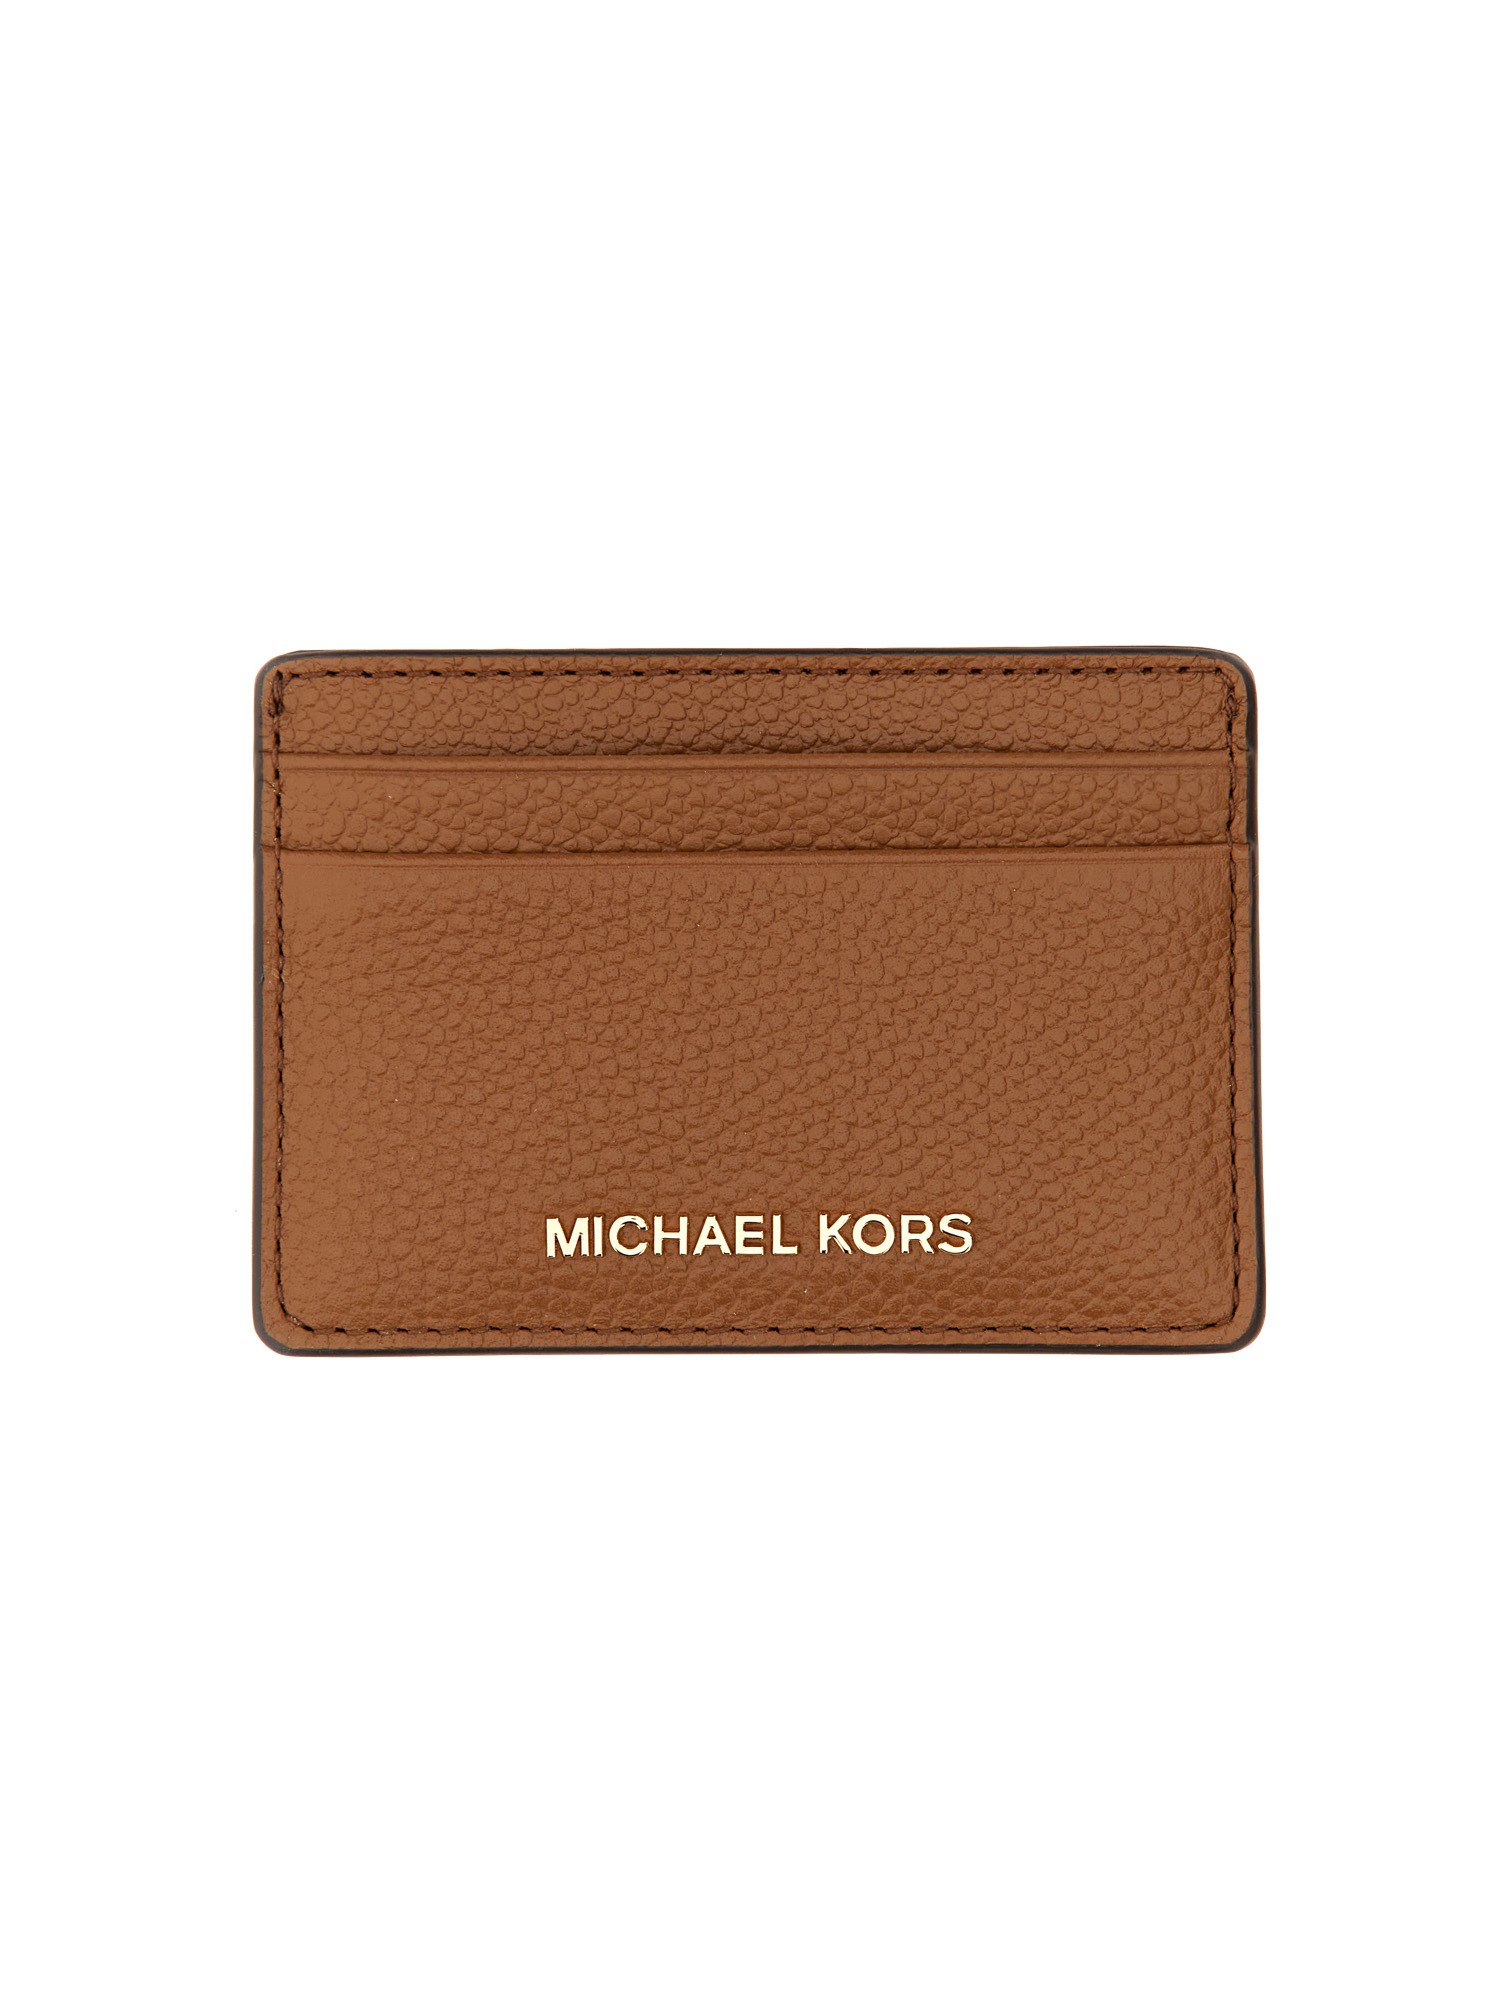 Michael Kors Jet Set Wallets for Women - Up to 60% off